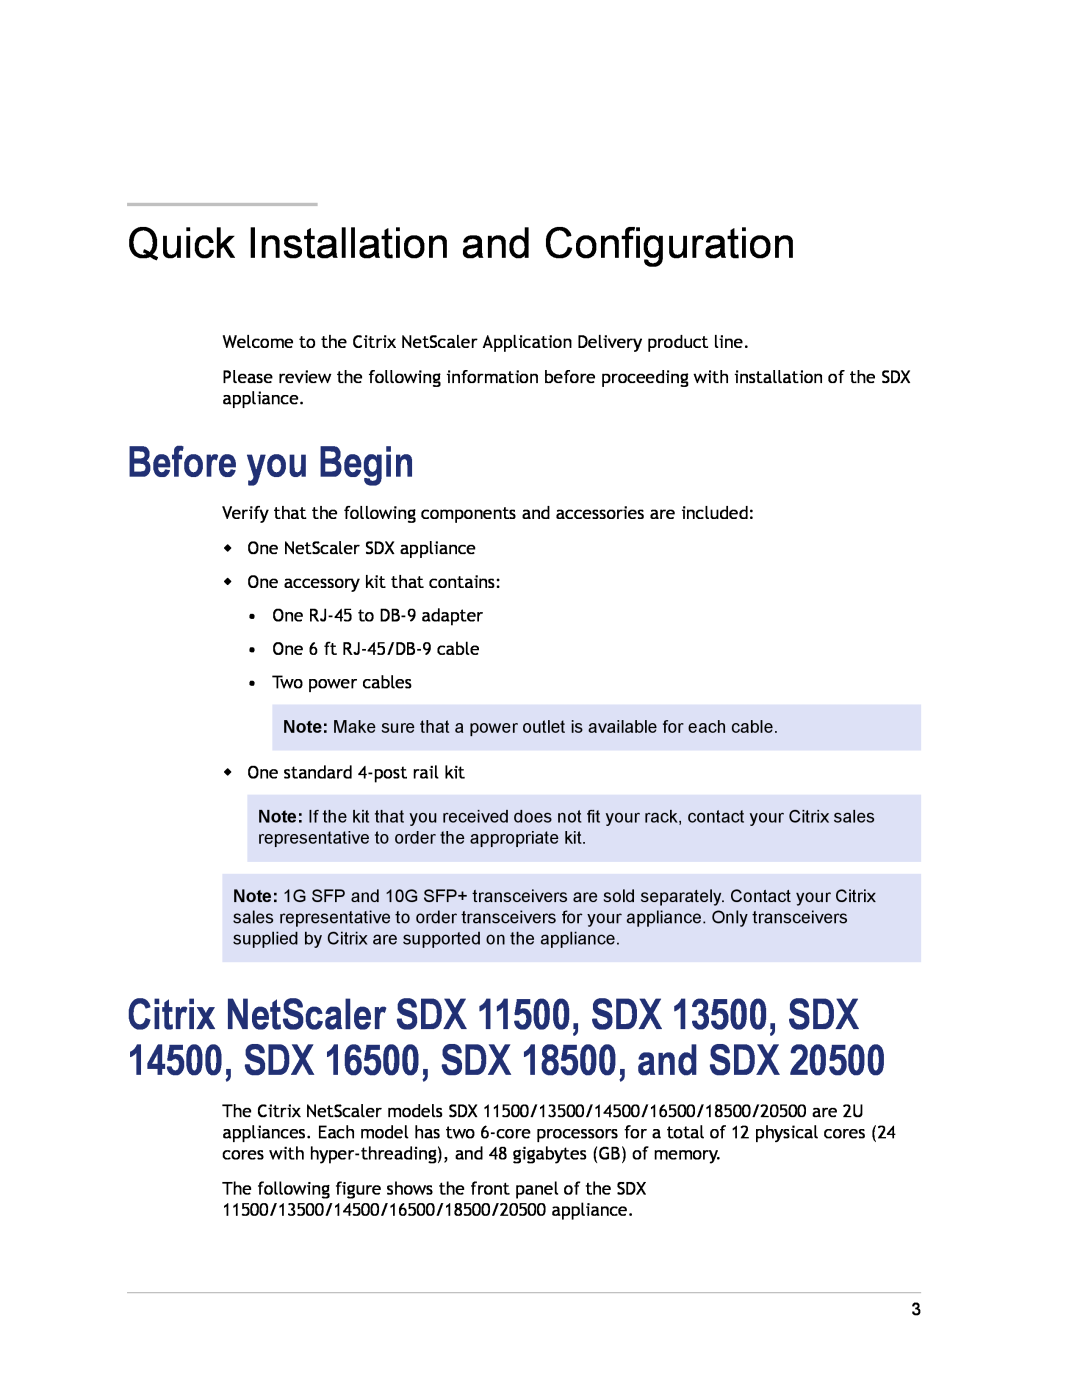 Citrix Systems SDX 20500, SDX 13500, SDX 16500, SDX 11500, SDX 18500 Before you Begin, Quick Installation and Configuration 